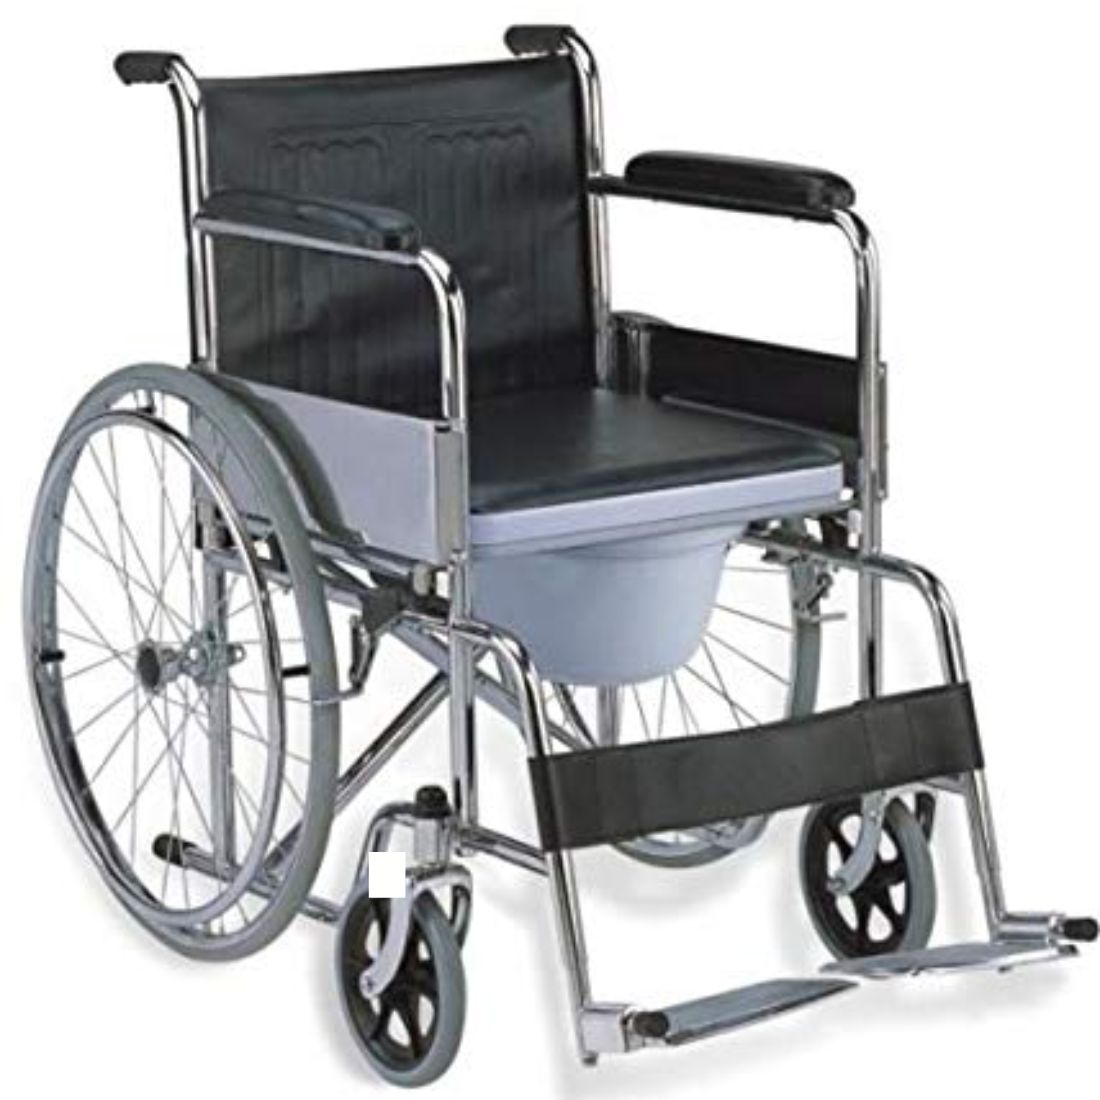 Wheel chair with Commode/toilet pot